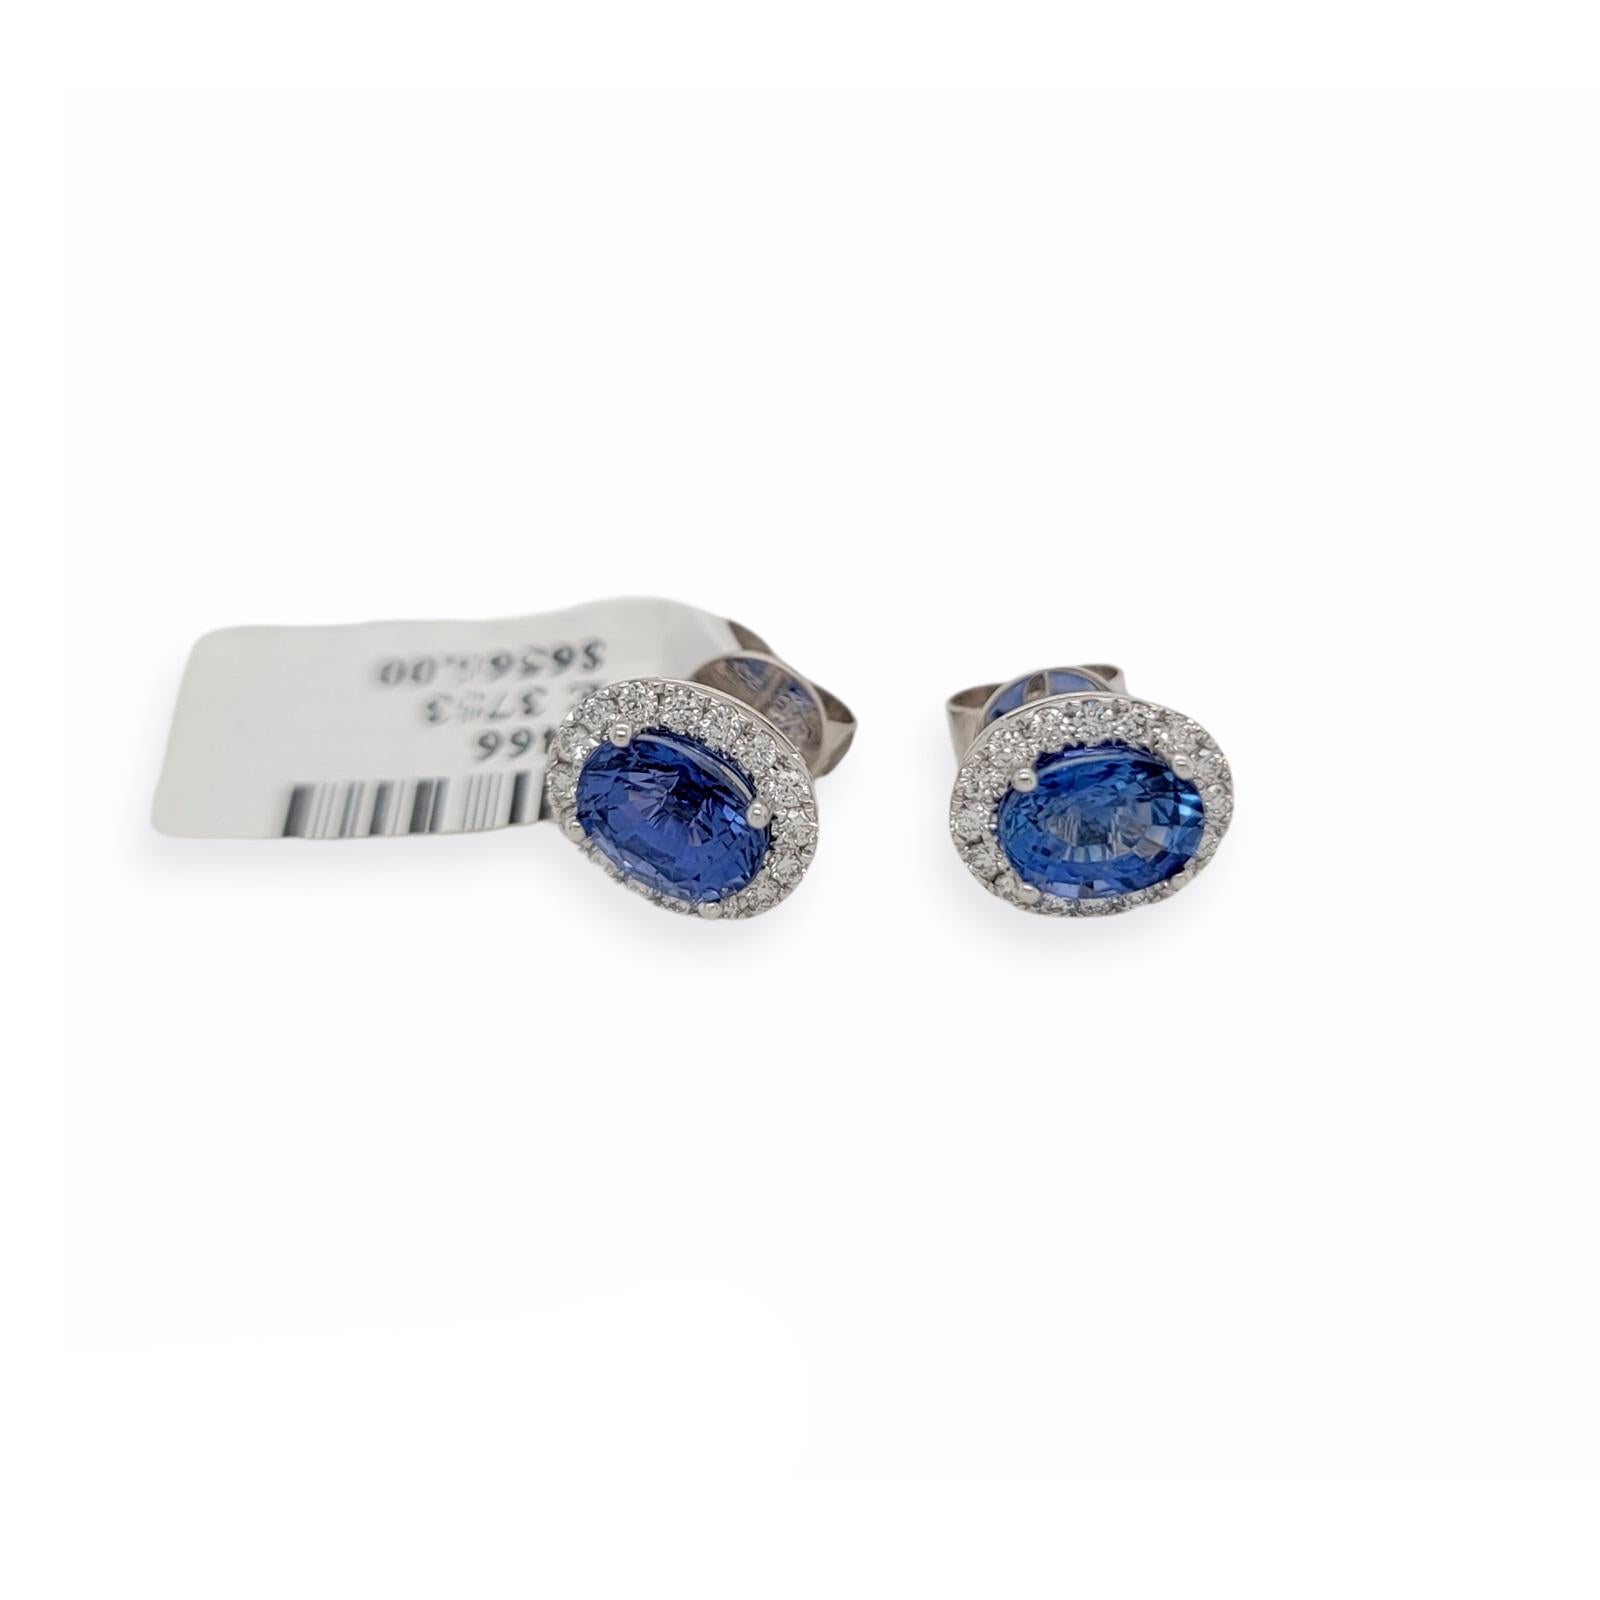 2.69 CT Natural Blue Sapphire & 0.37 CT Diamonds 14K White Gold Stud Earrings In Excellent Condition For Sale In Los Angeles, CA